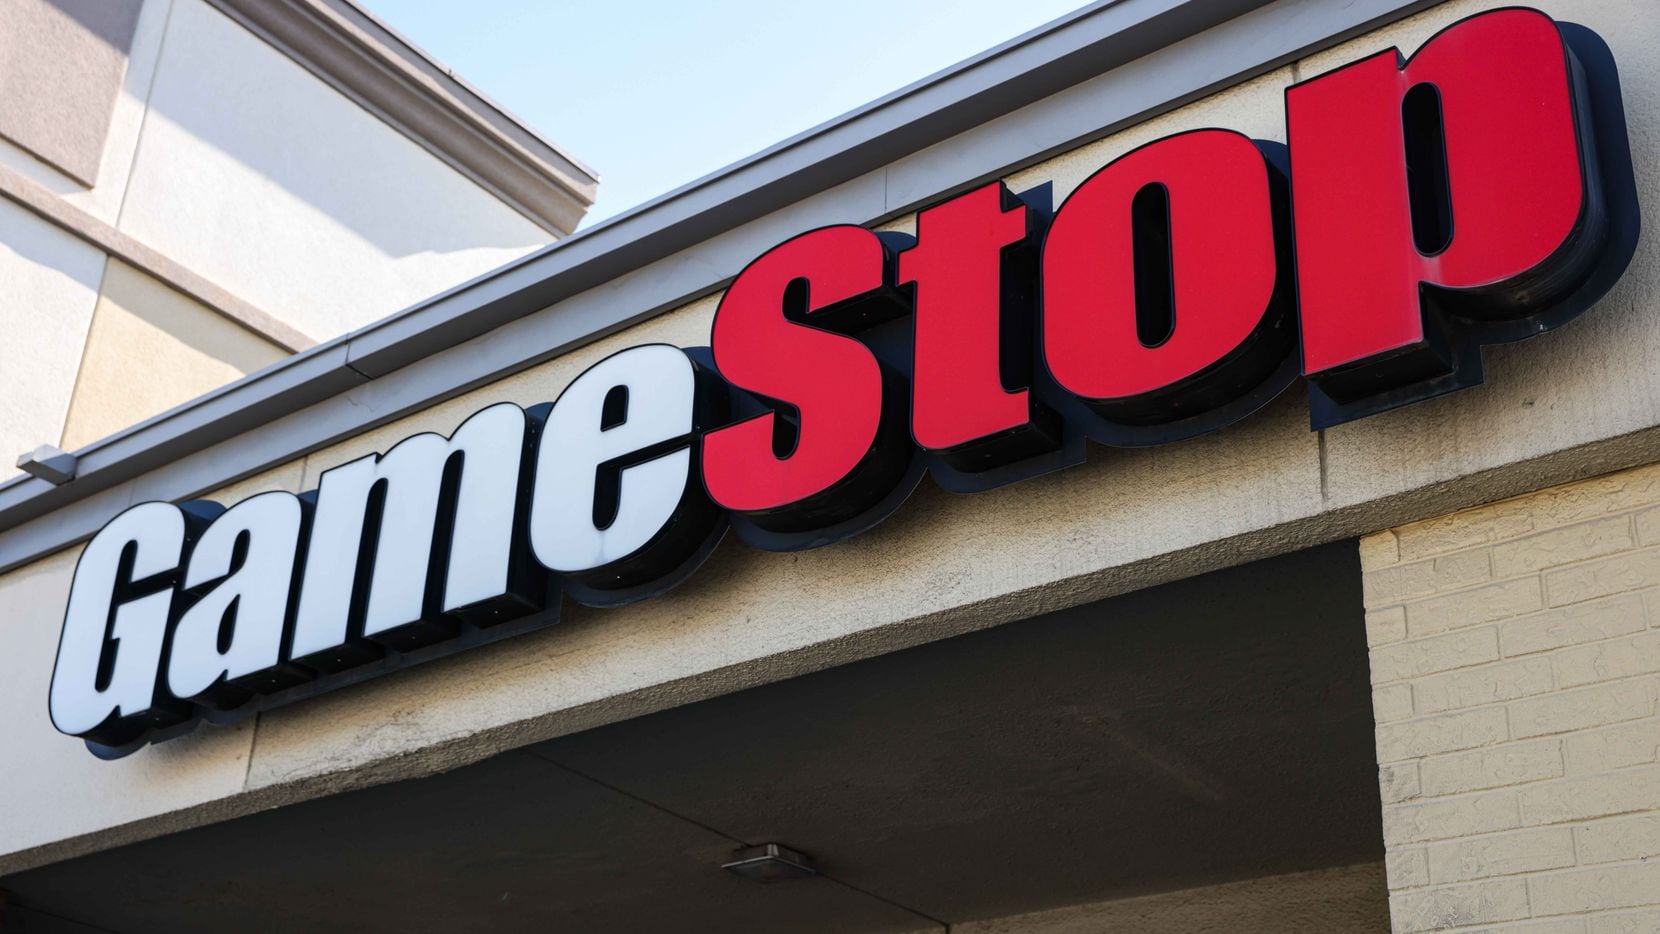 GameStop said it will fight the suit, which it said lacks merit and reflects BCG’s...